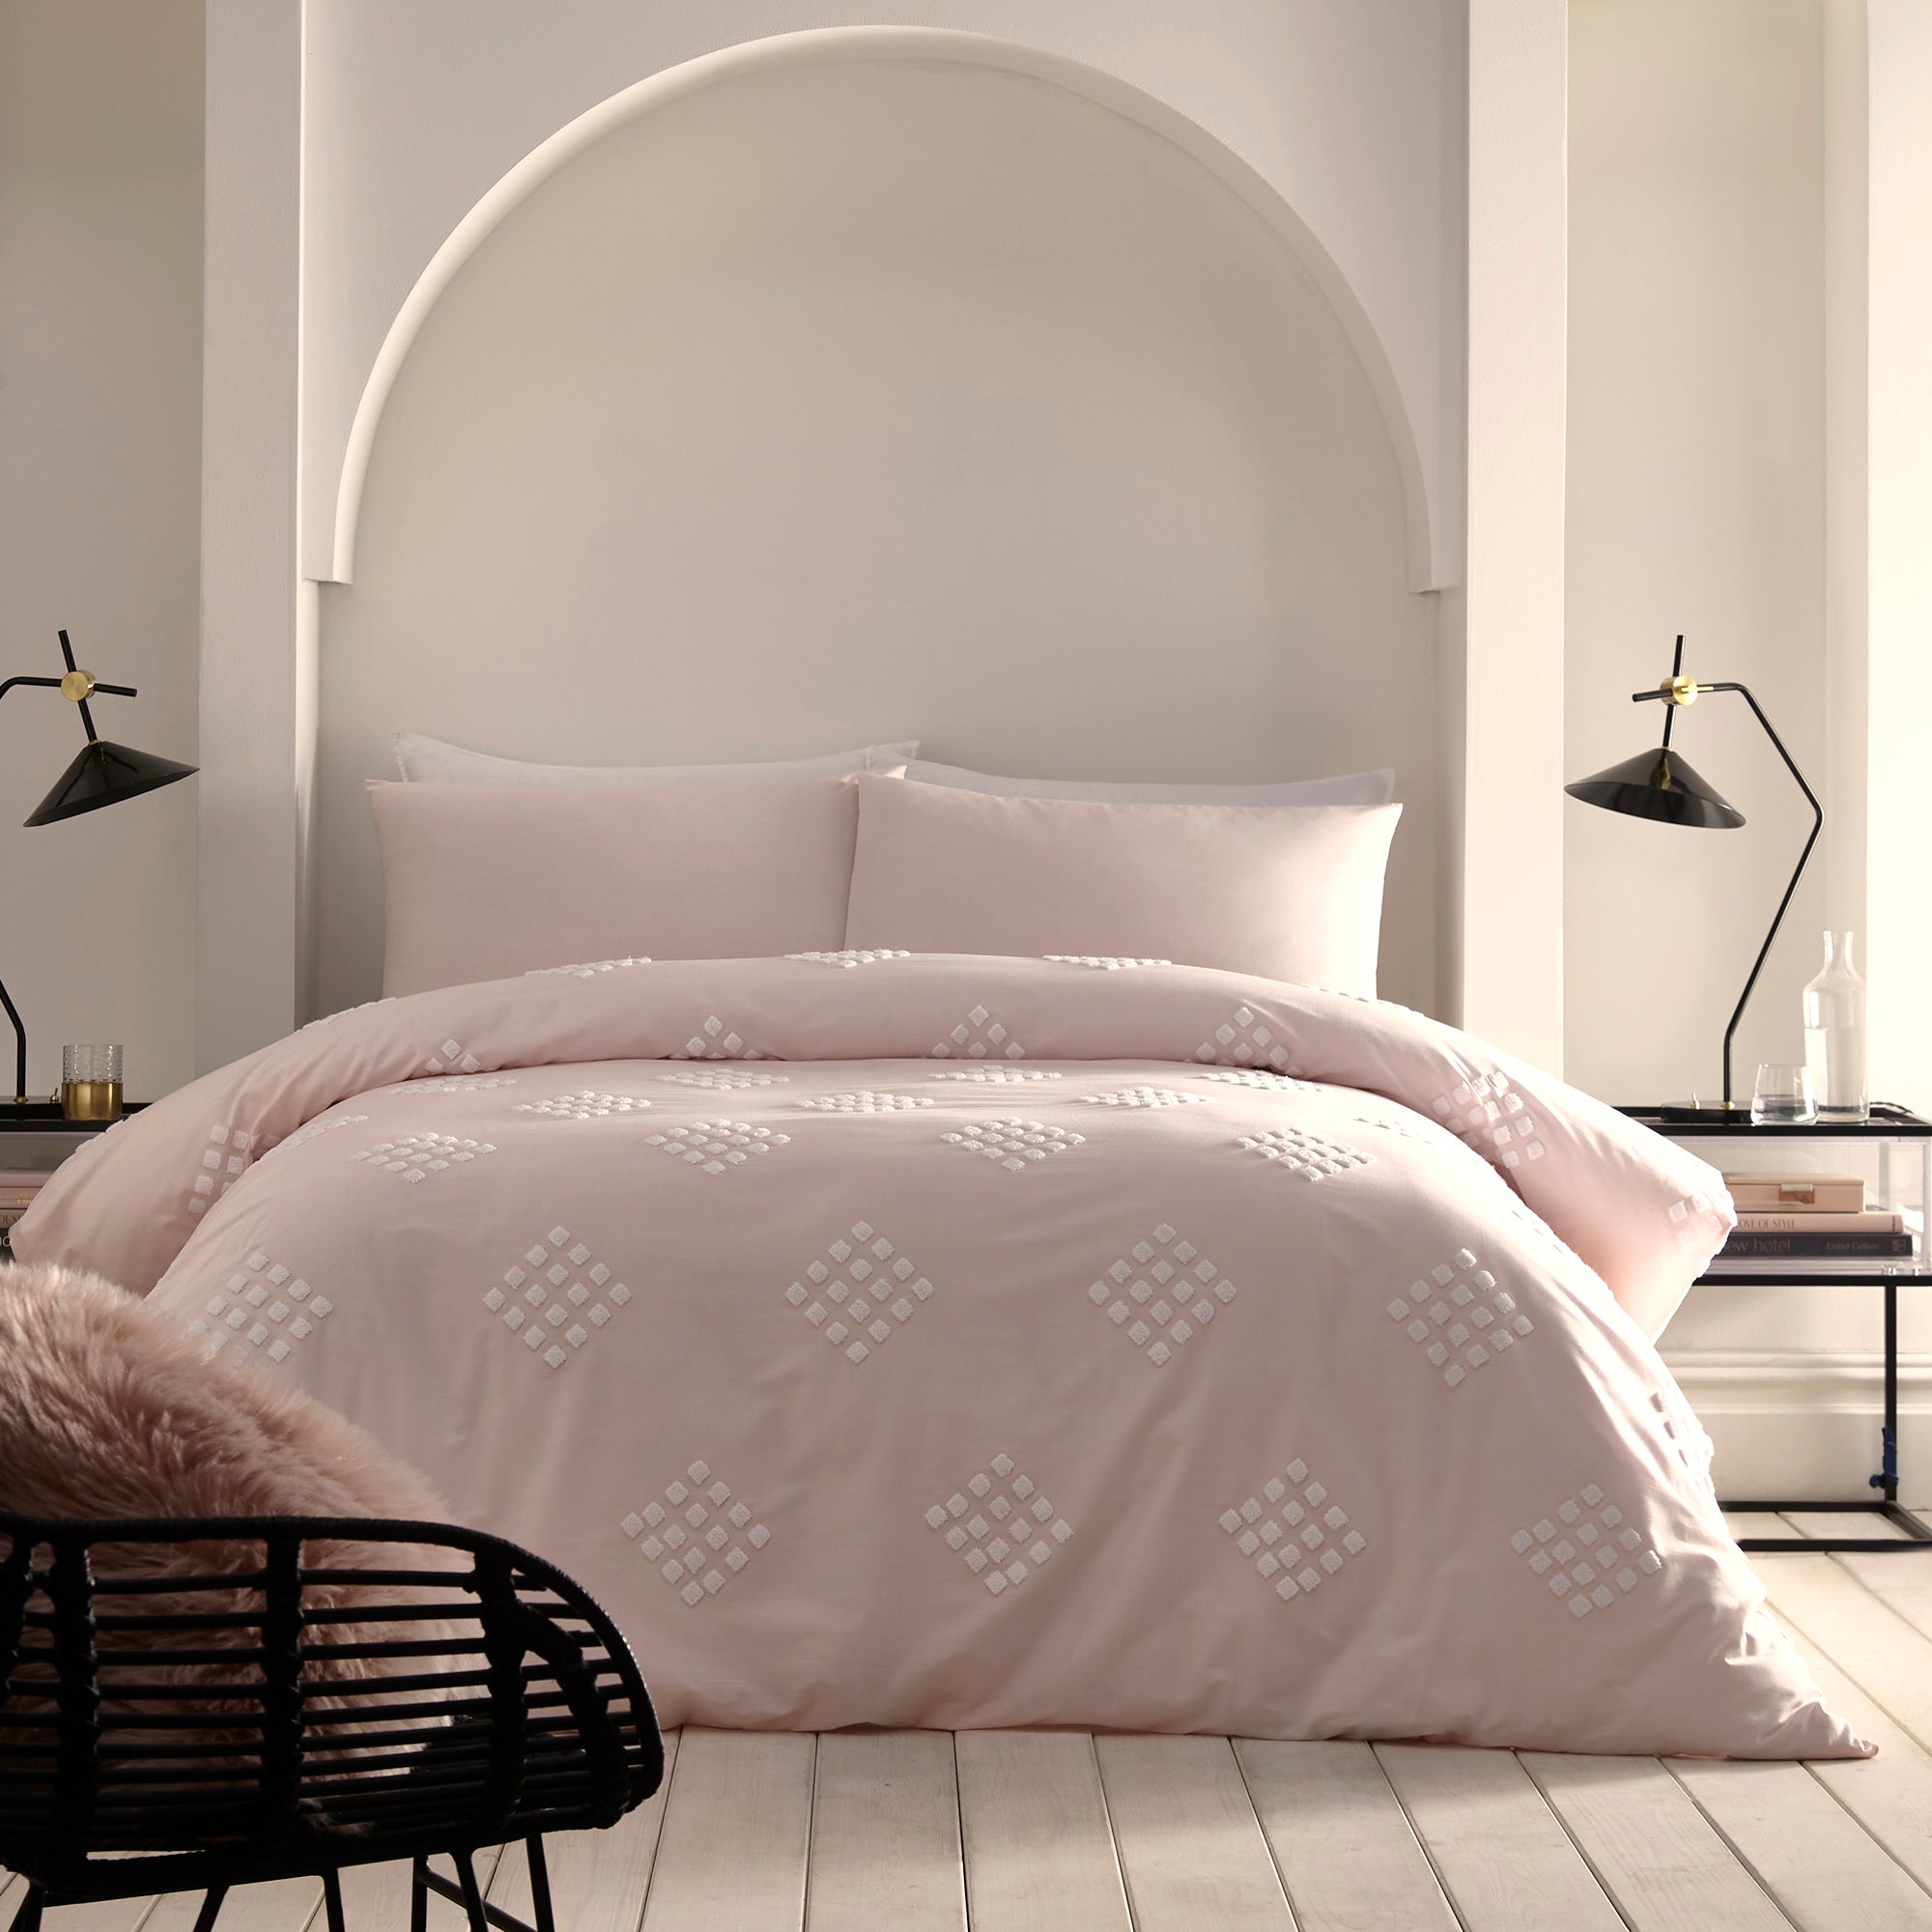 Diamond Tuft - 100% Cotton Duvet Cover Set in Blush - by Appletree Boutique